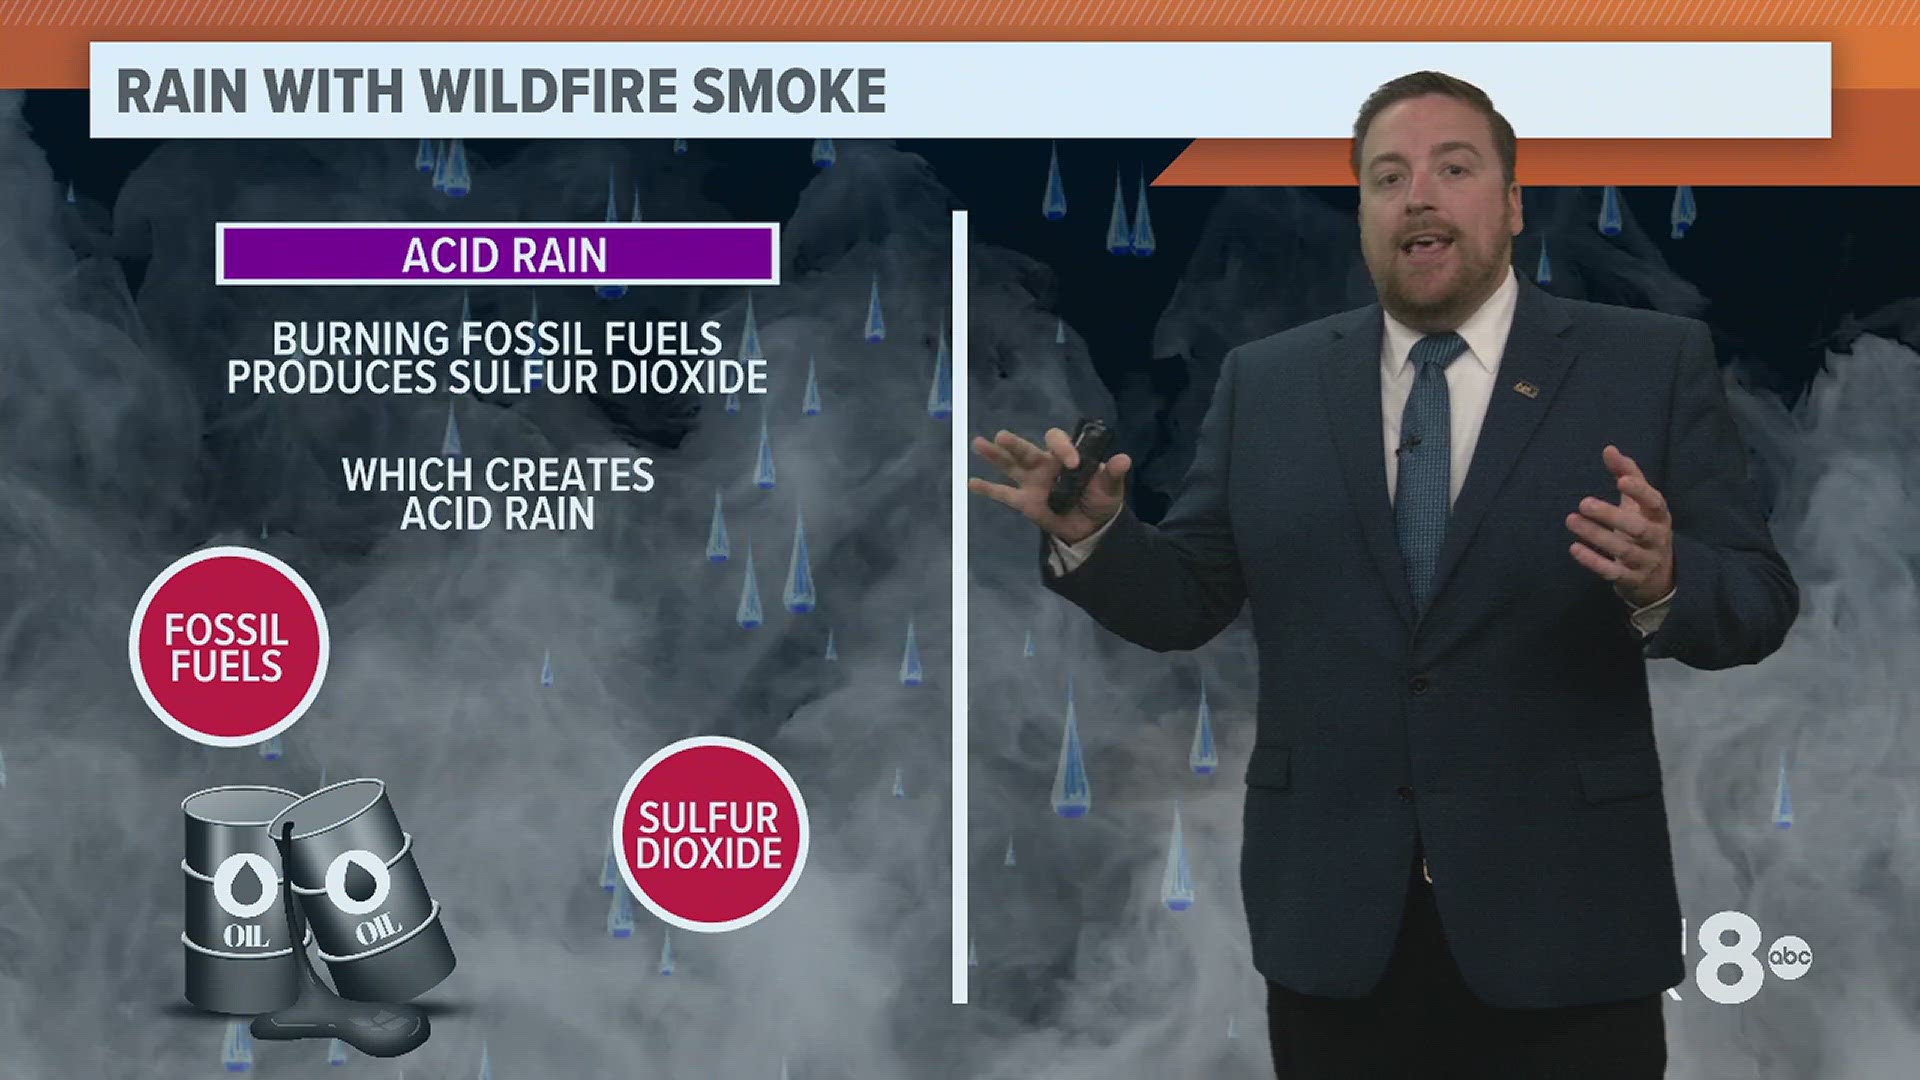 Catching up on questions from earlier in the week, learn from our News 8 meteorologist about the toxicity, or lack thereof, of rainwater falling through smoke.